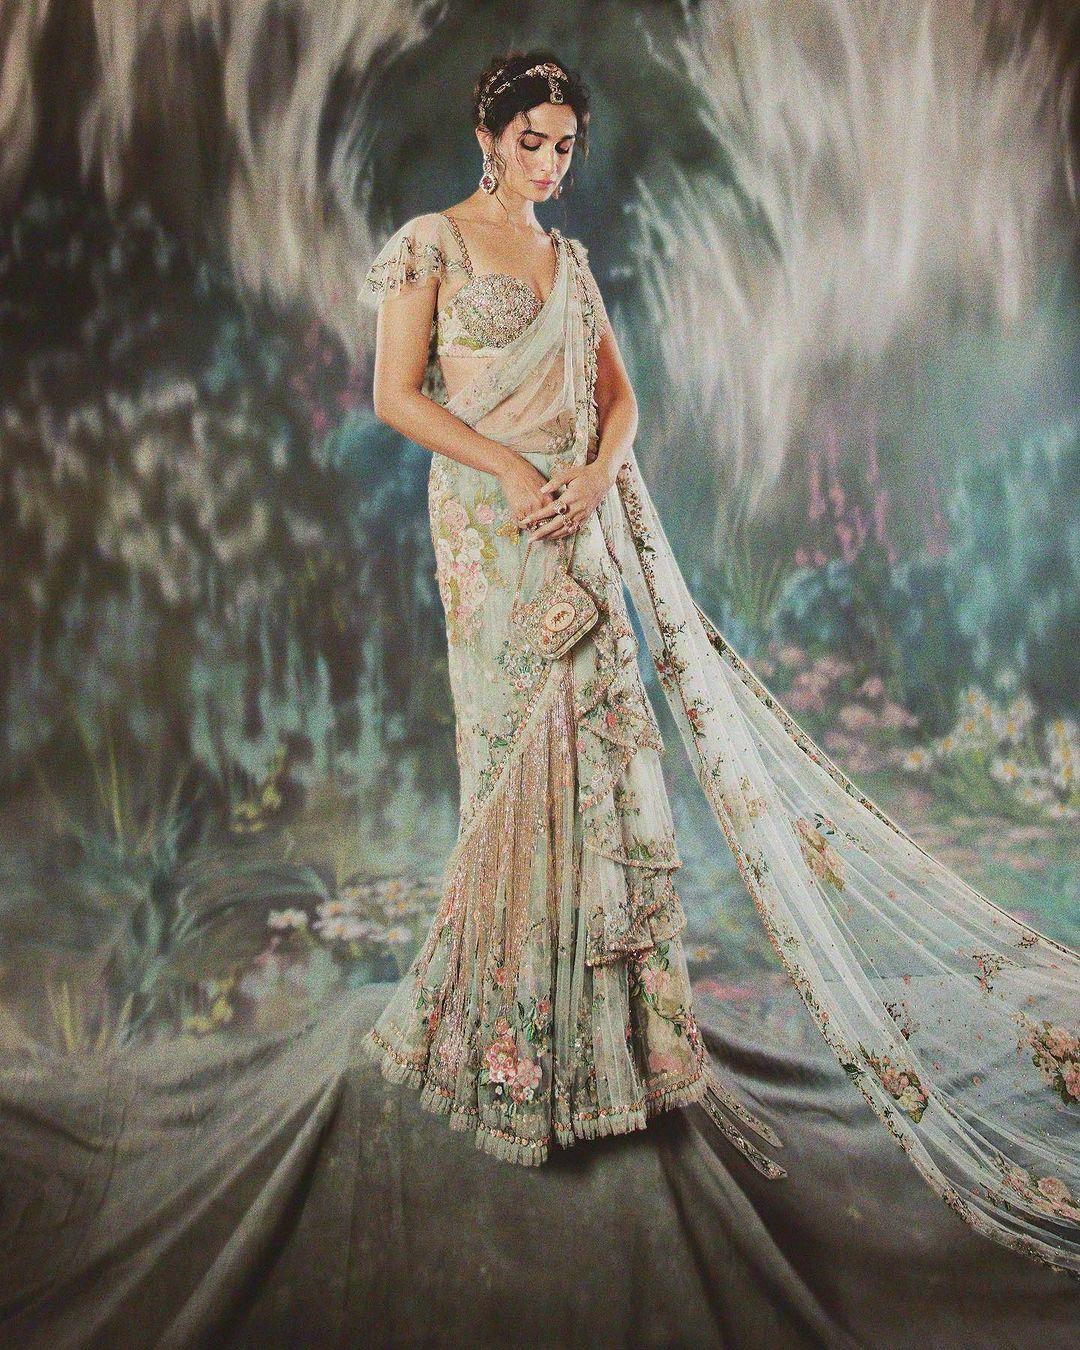 The beautiful mint green saree was crafted by a team of 163 artisans in India, who spent around 1,965 hours working on it over several months